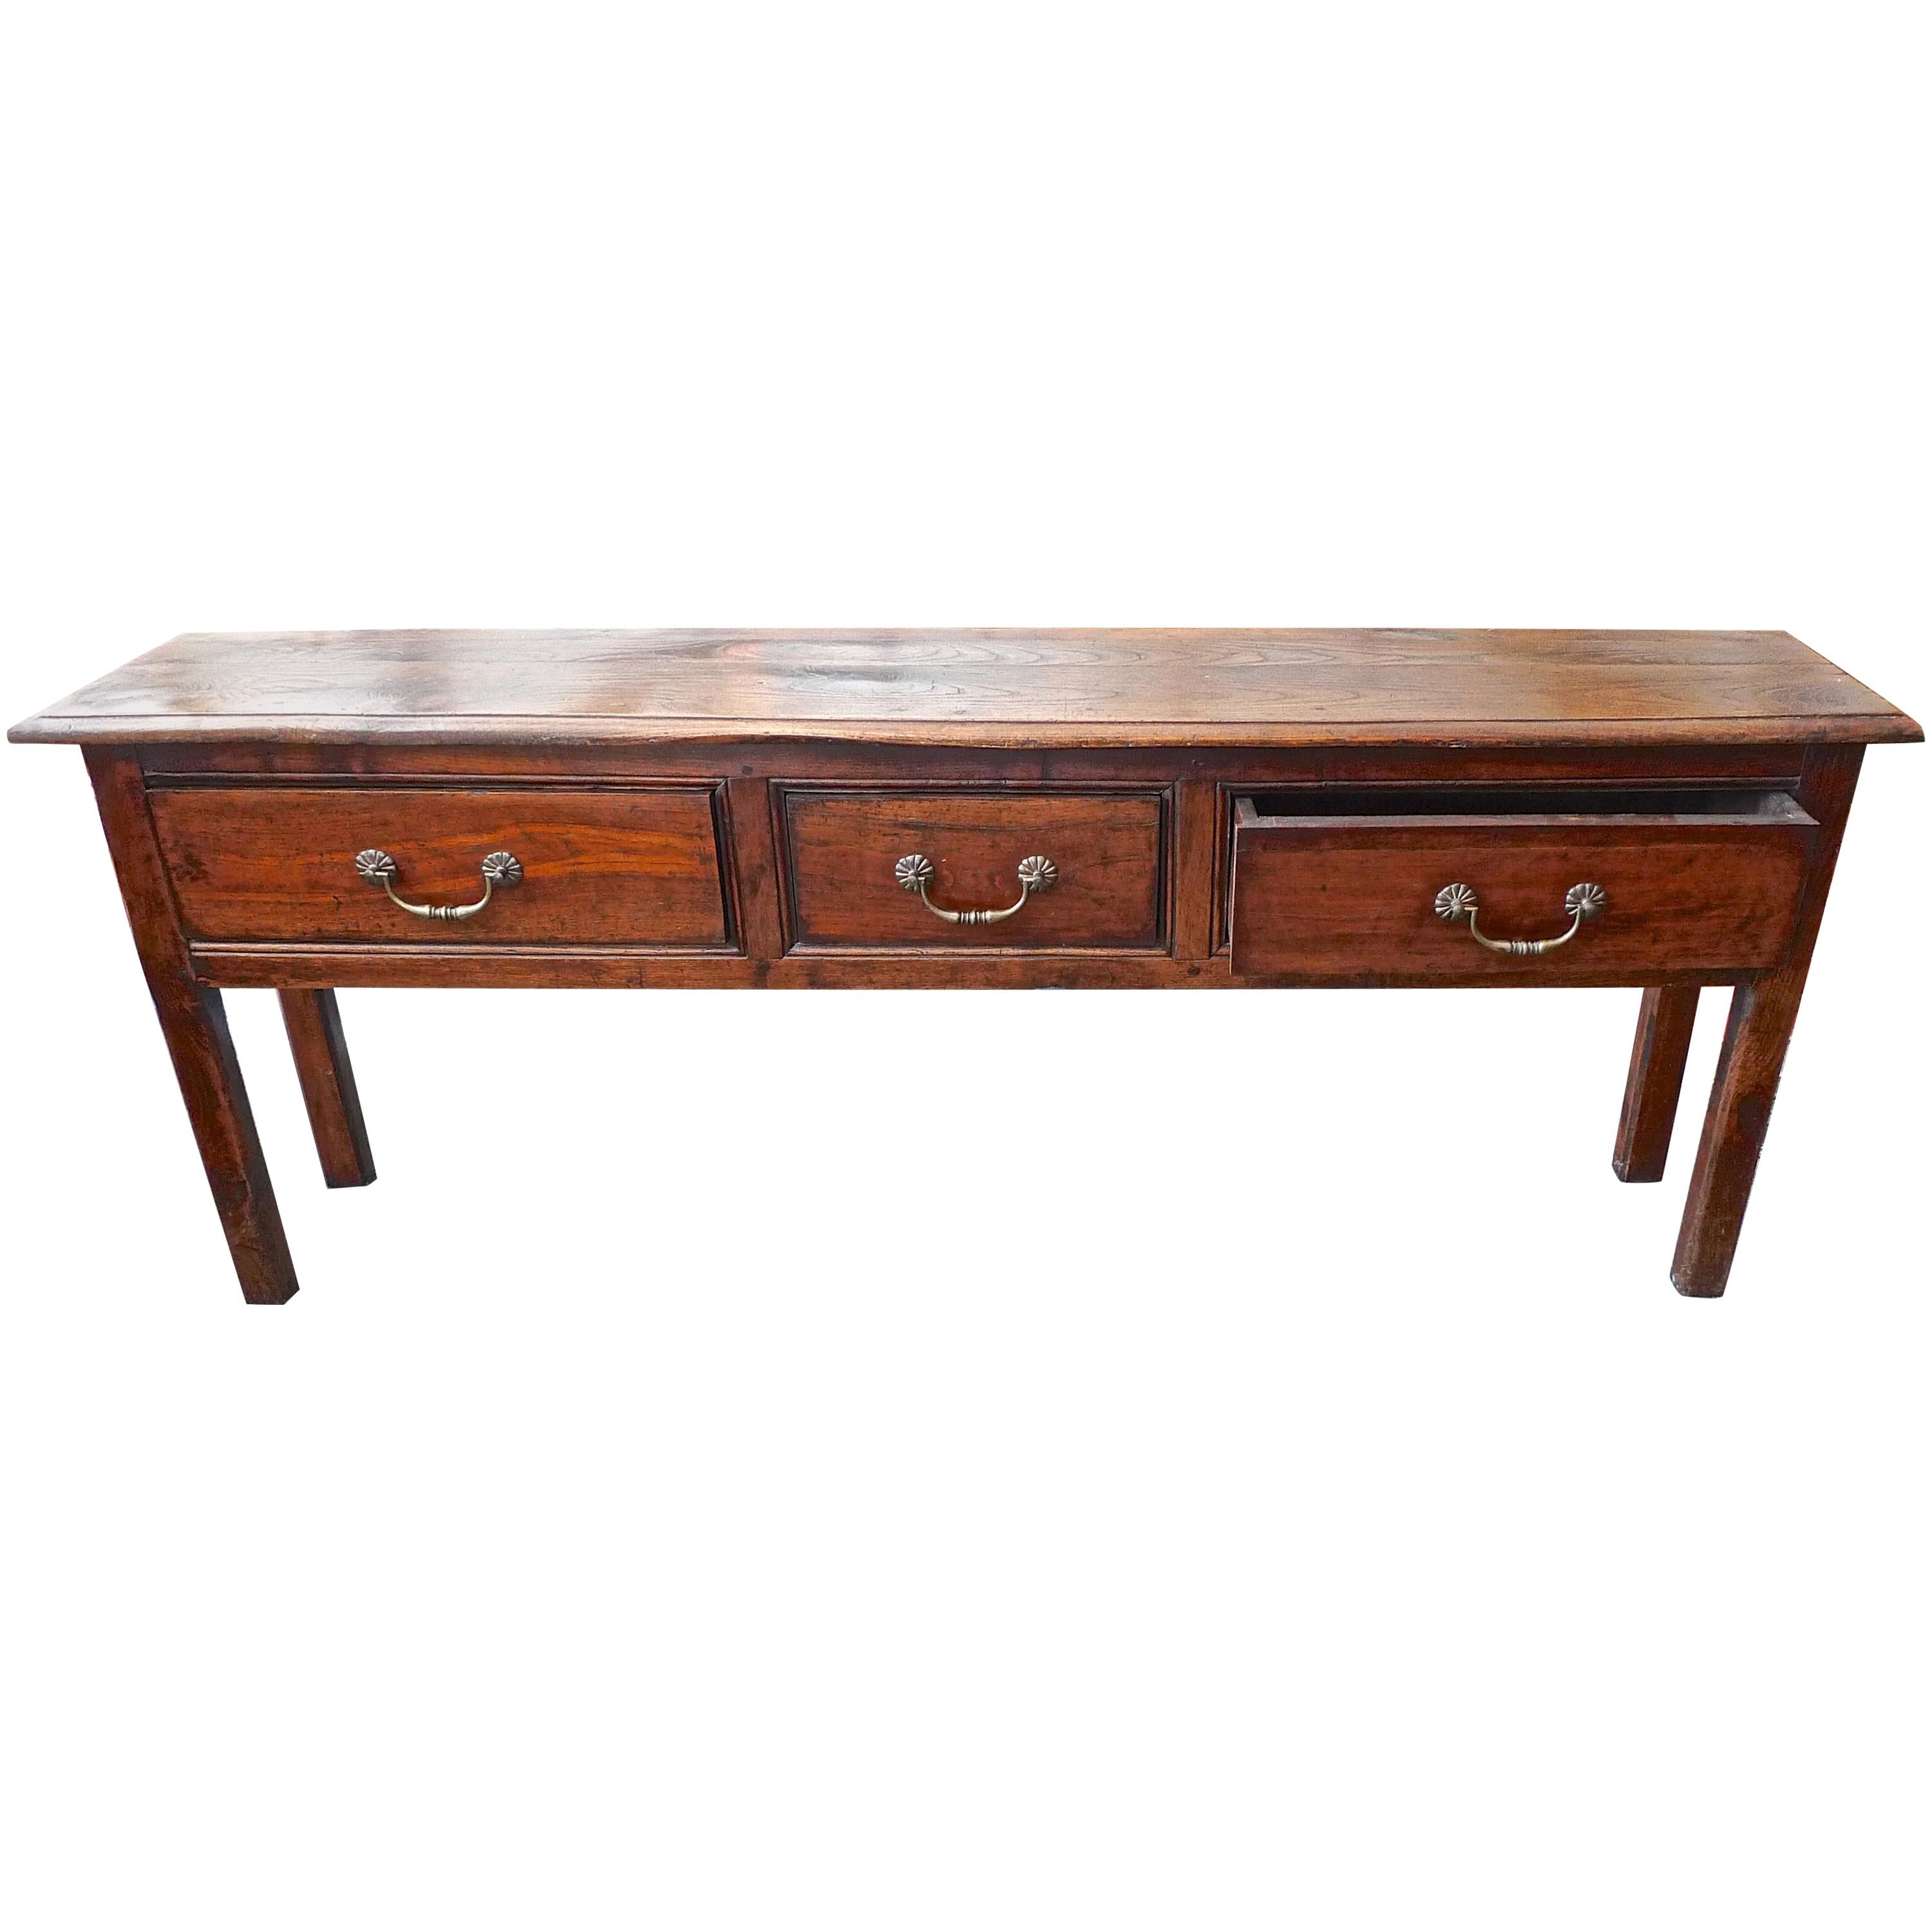 French XIX Long Walnut Console Table with Three Drawers with Original Hardware